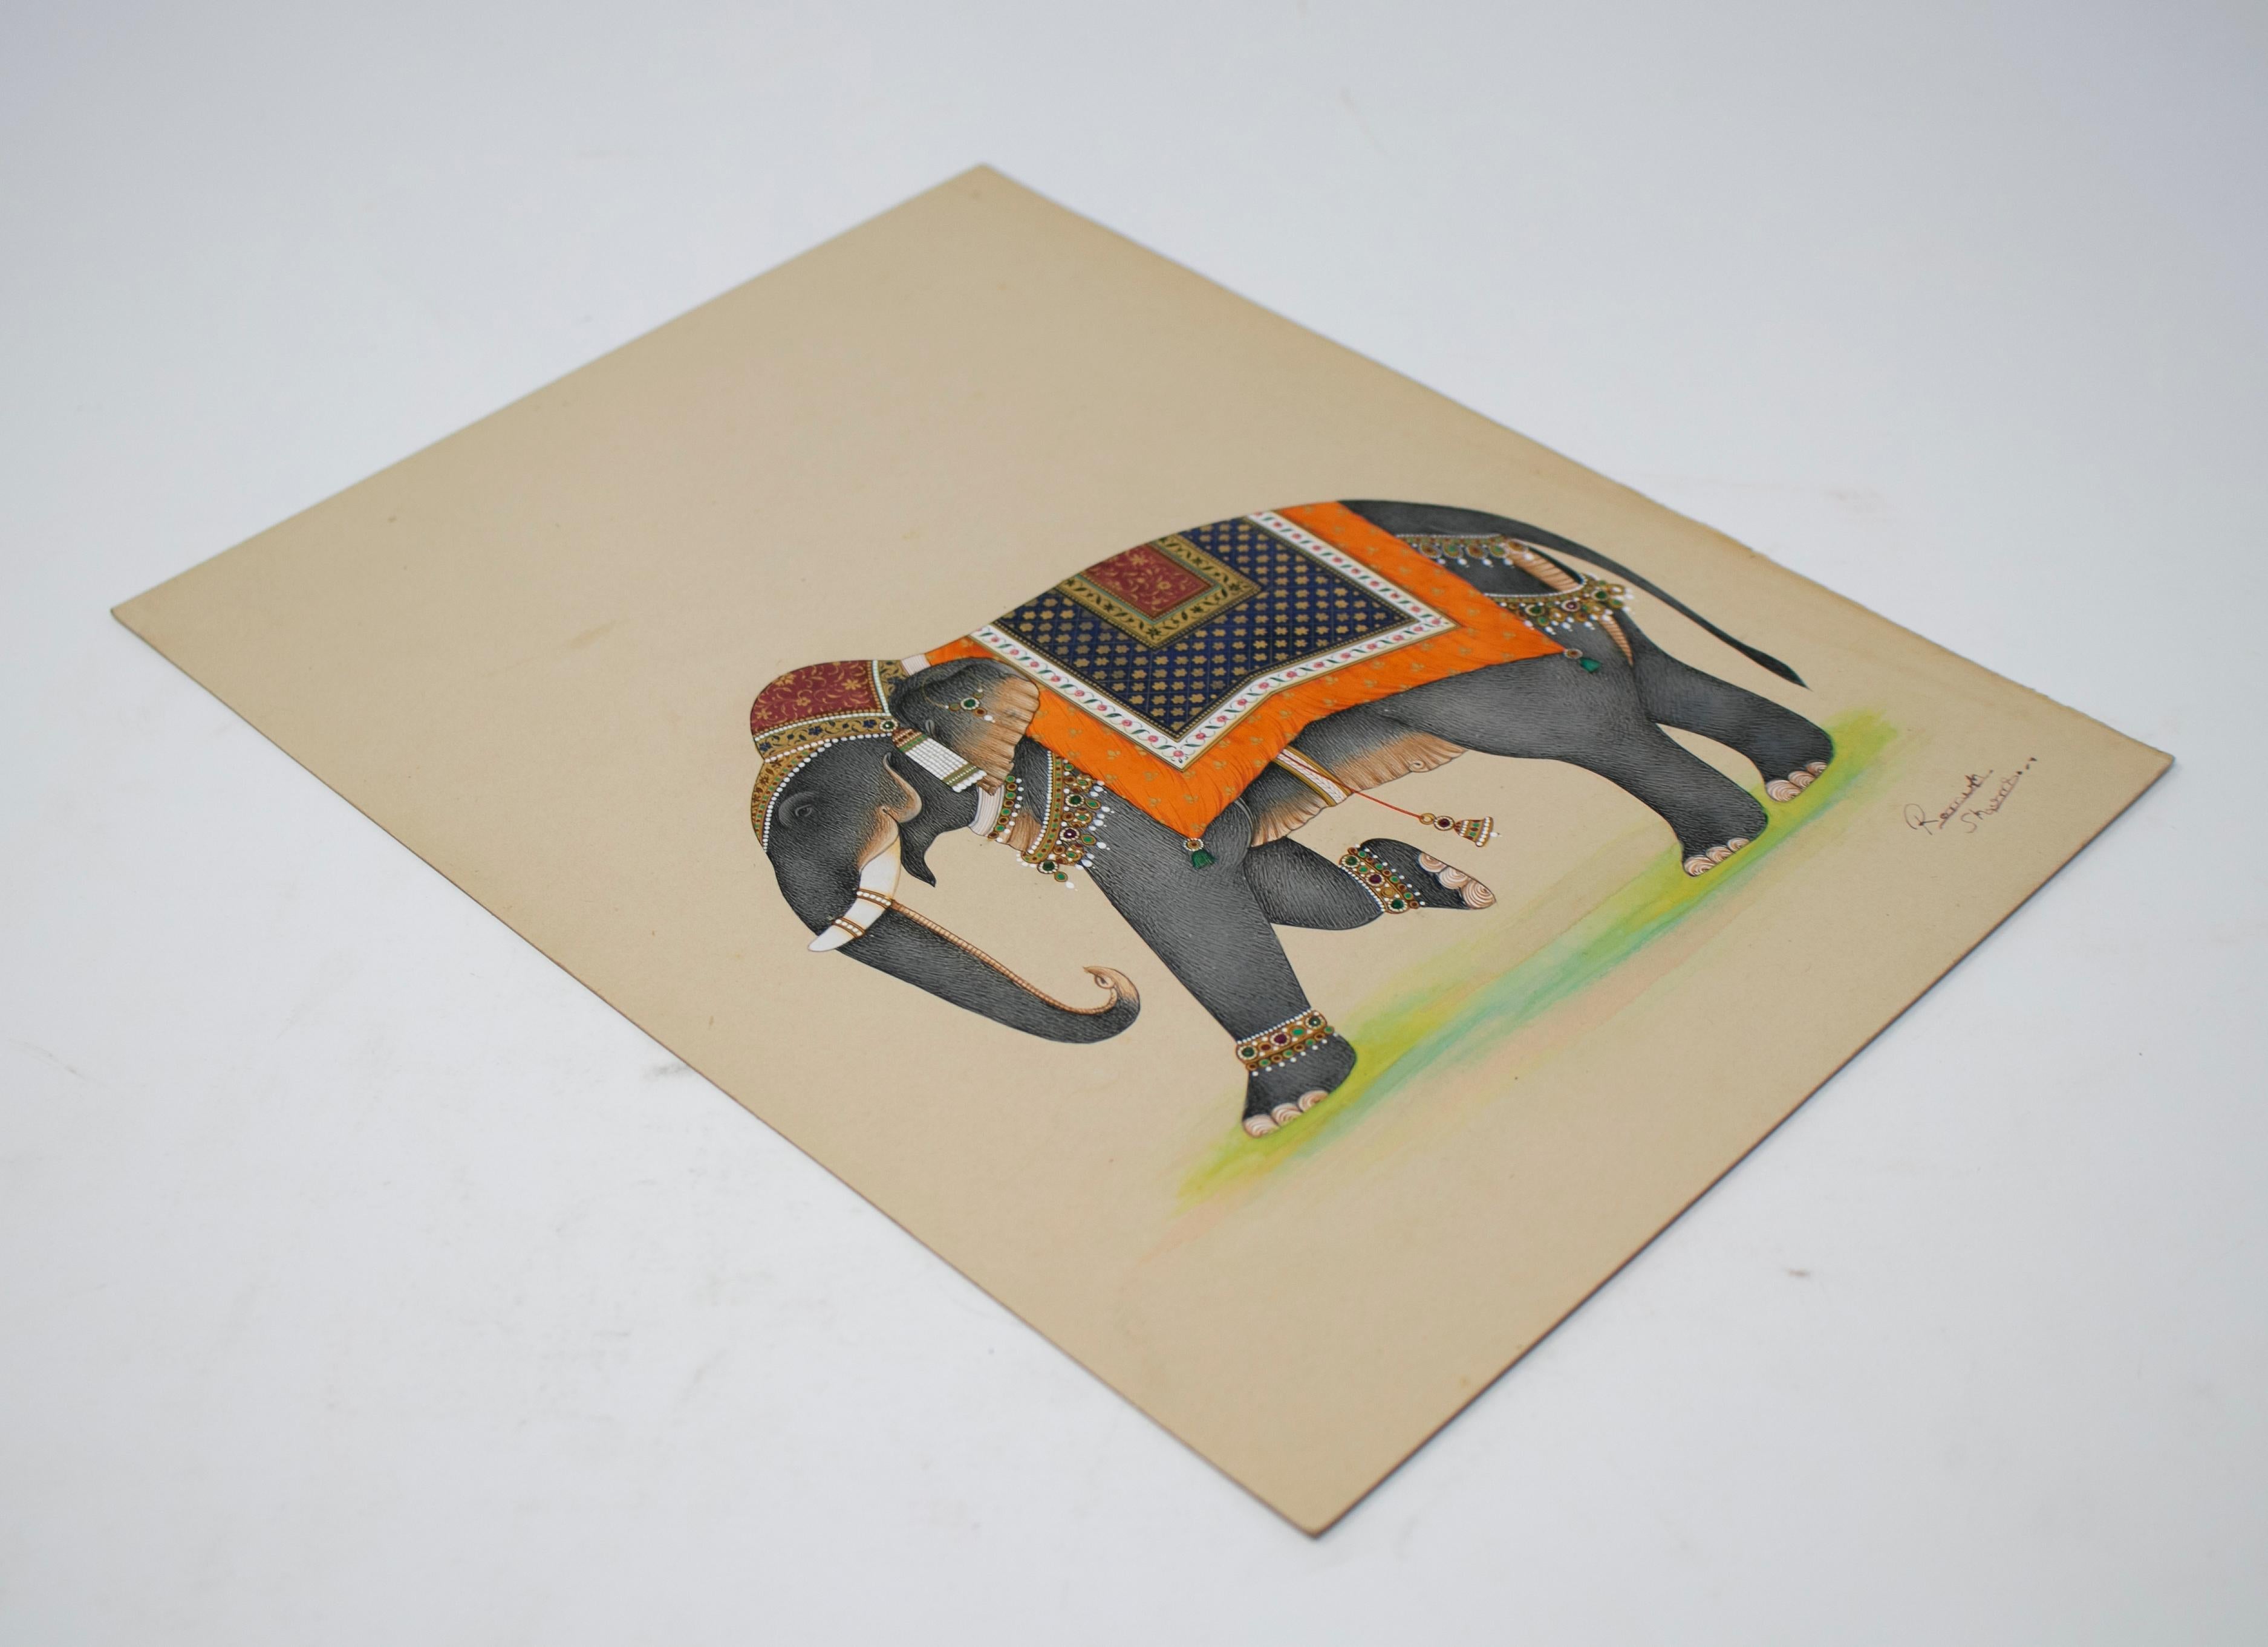 Ramesh Shames, Indian pair of colourful elephant and camel paper drawings, circa 1970. They are part of a large private collection.

Dimensions of each.